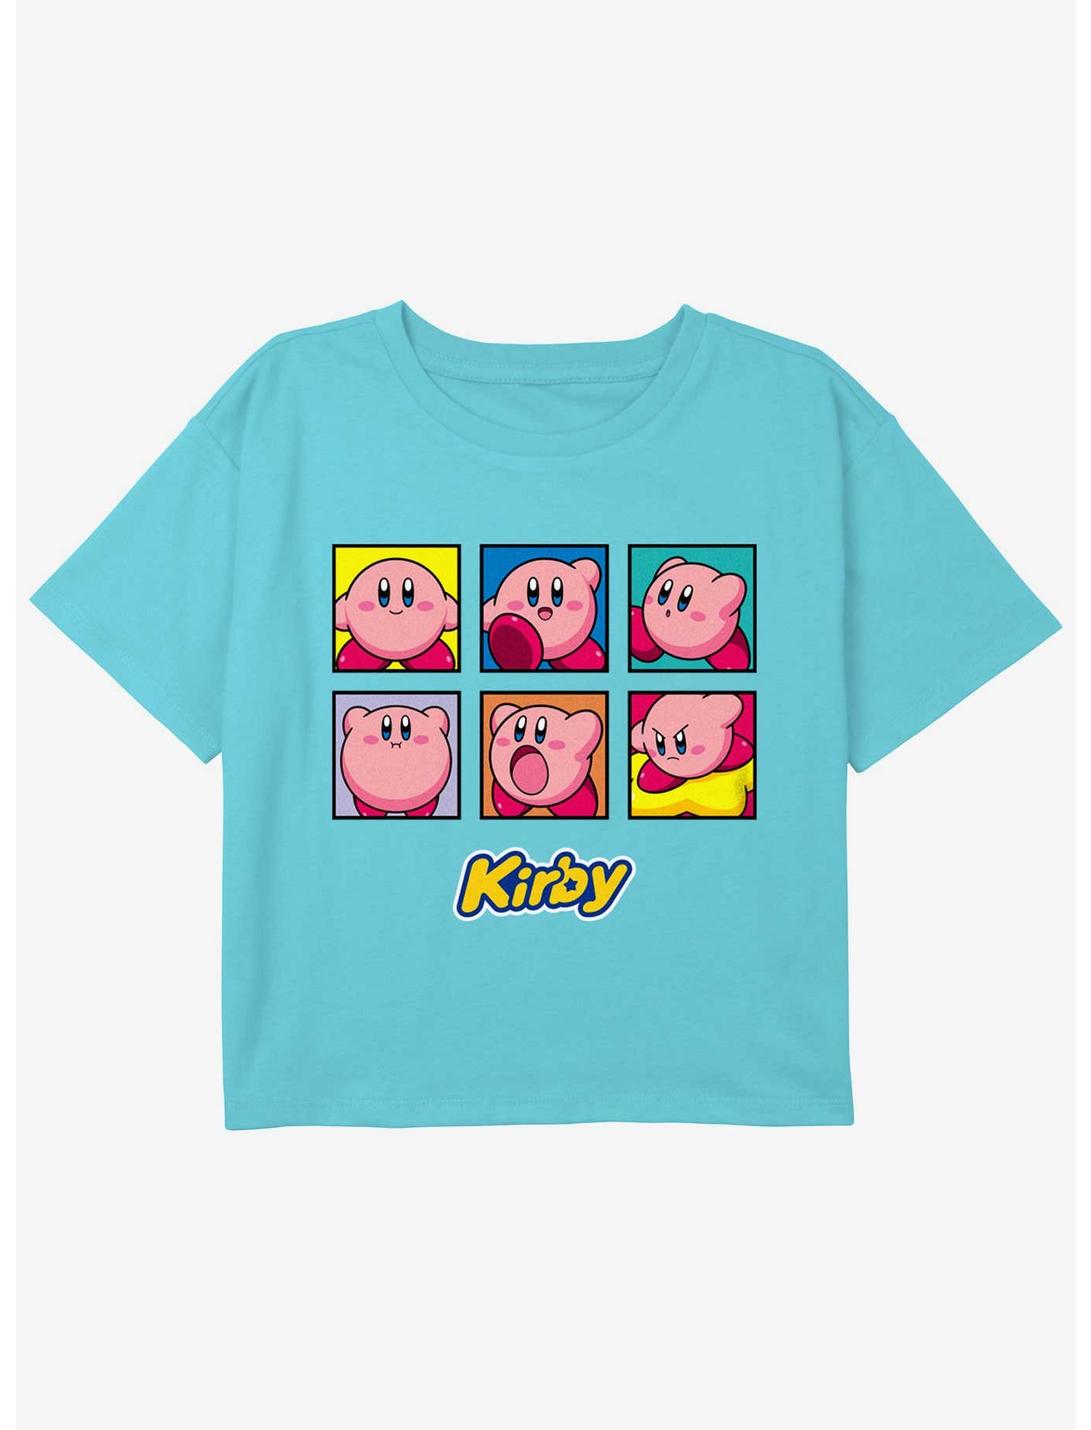 Kirby Expressions Girls Youth Crop T-Shirt, BLUE, hi-res